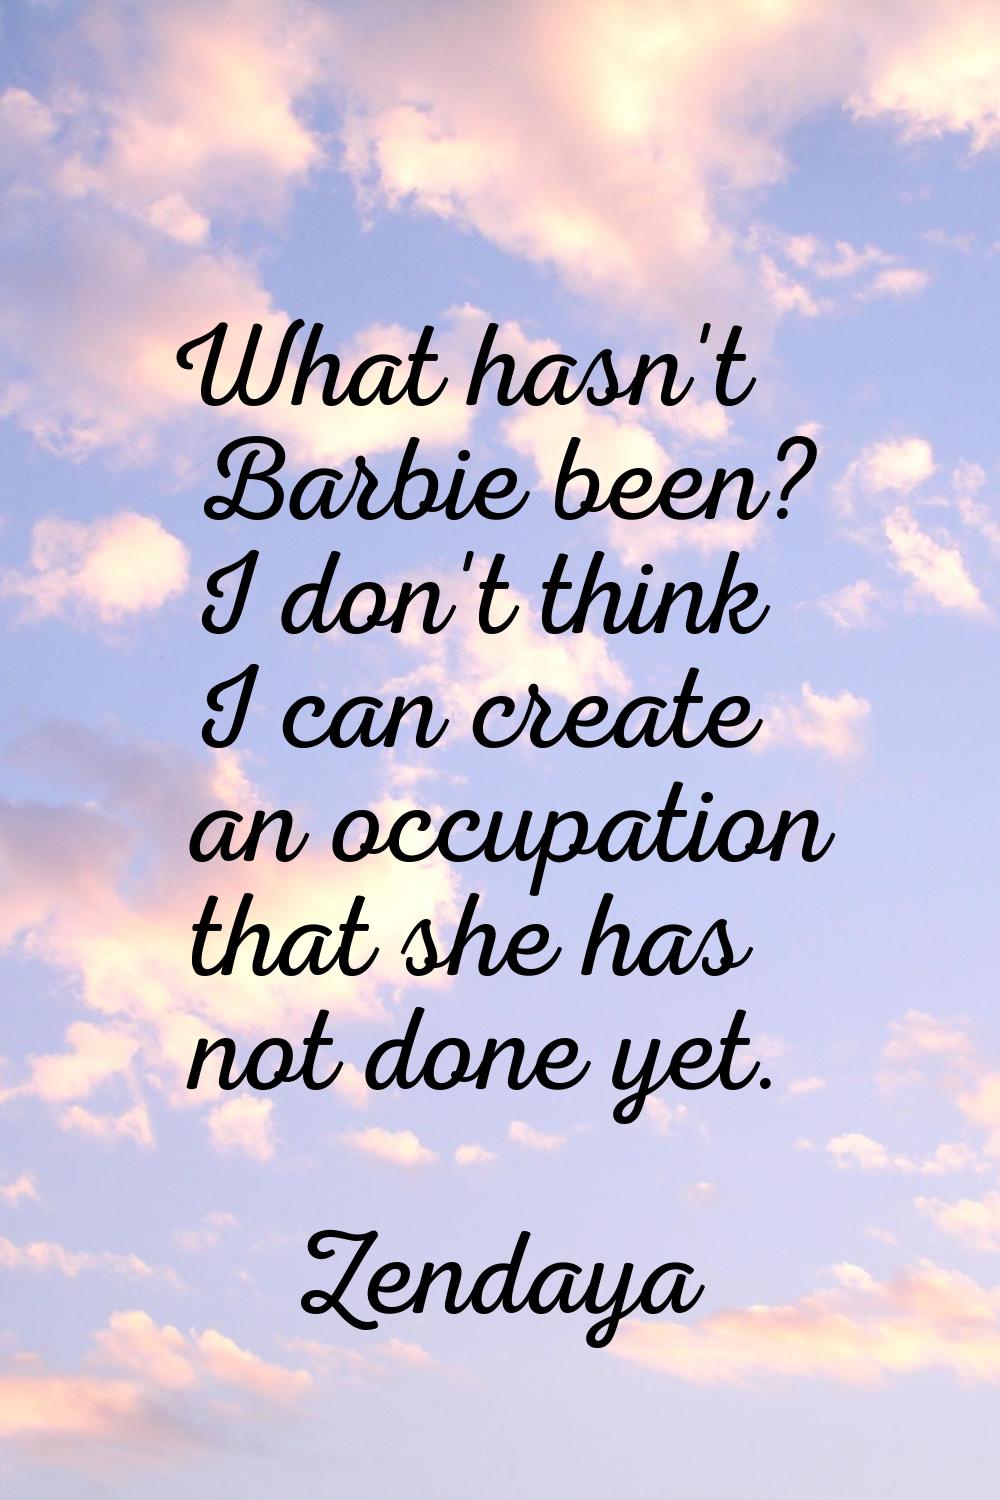 What hasn't Barbie been? I don't think I can create an occupation that she has not done yet.